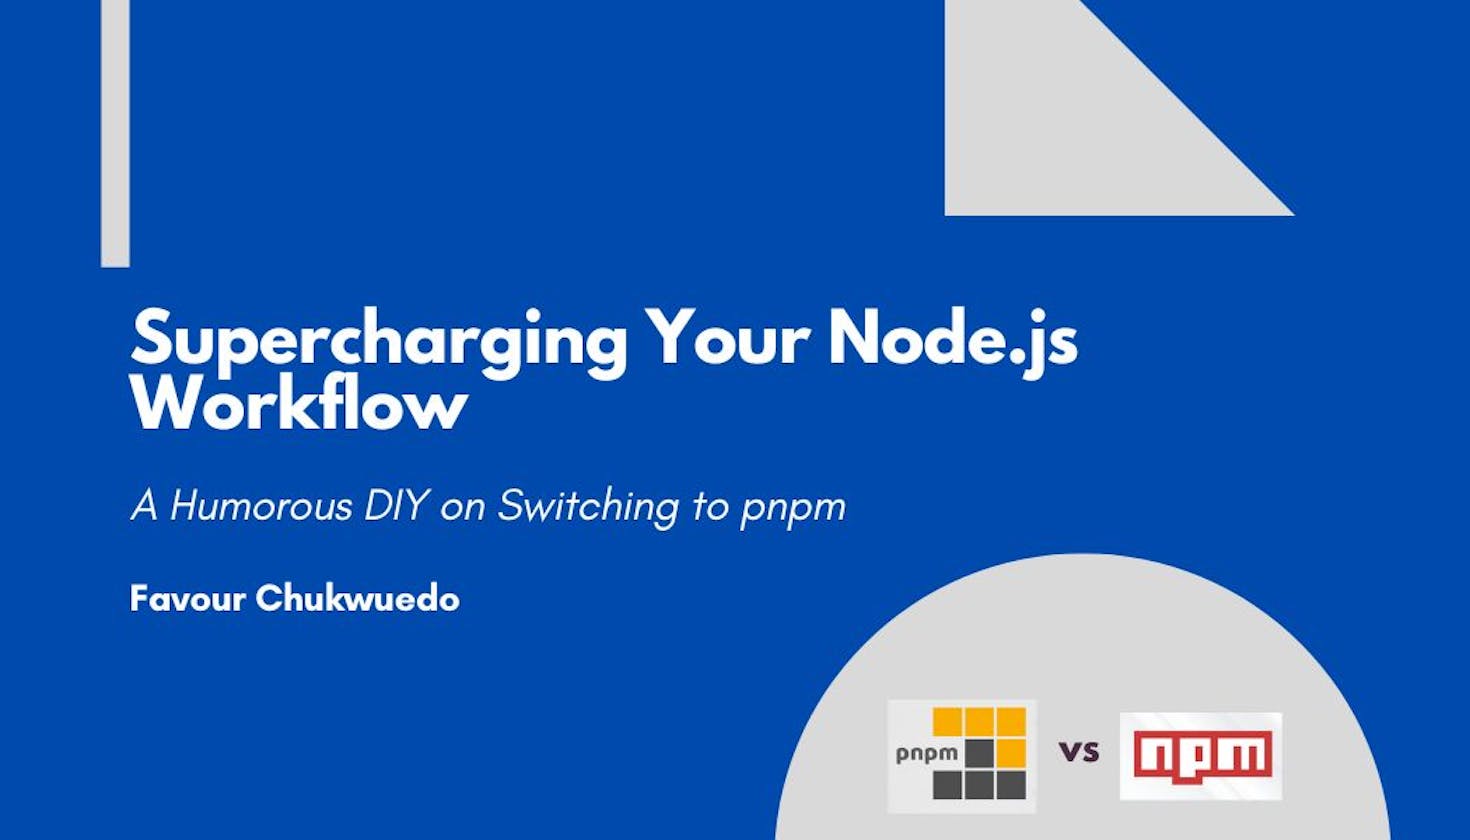 Supercharging Your Node.js Workflow: A Humorous DIY on Switching to pnpm